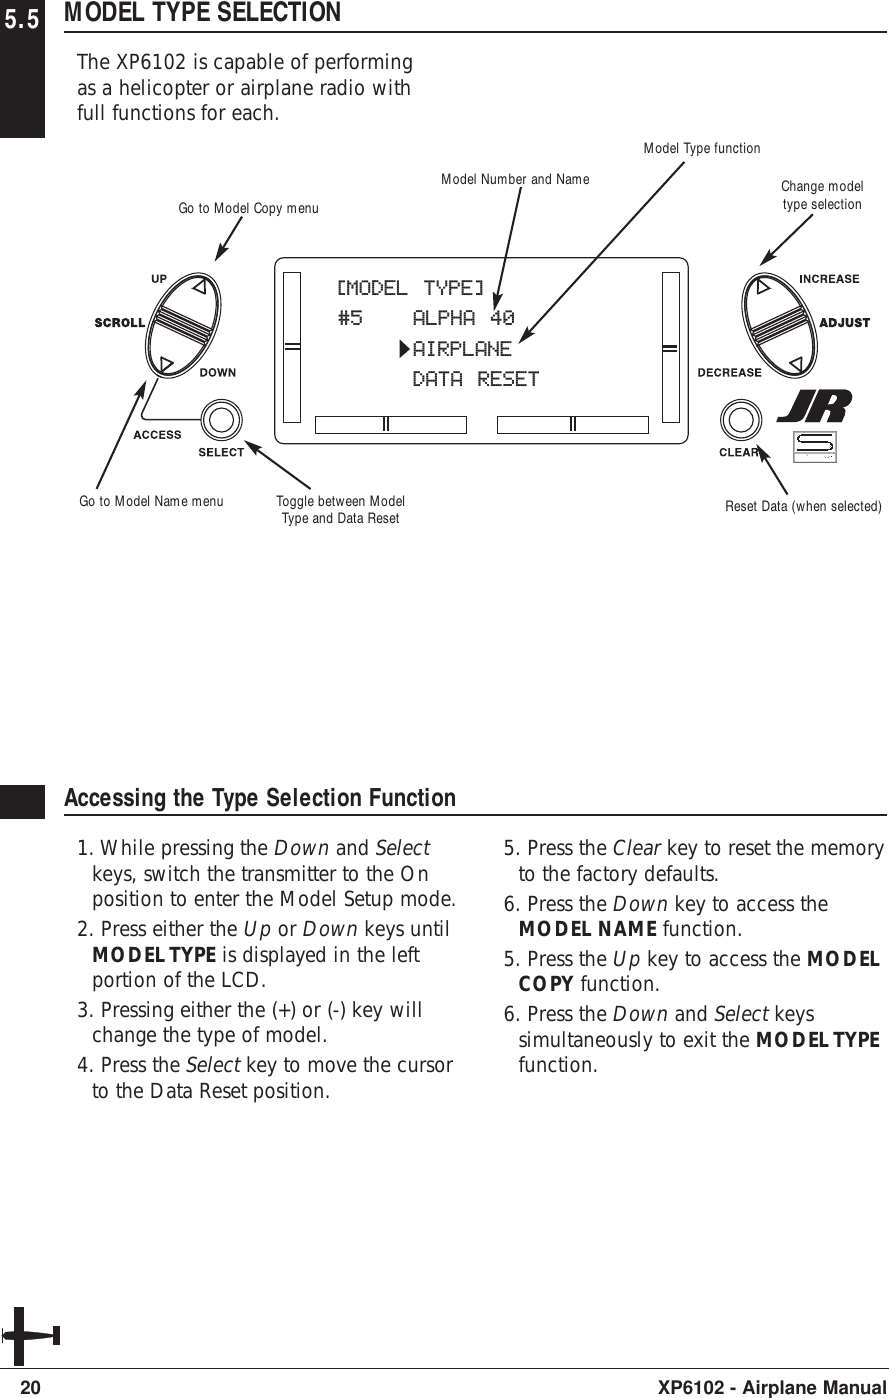 5.5 MODEL TYPE SELECTIONThe XP6102 is capable of performingas a helicopter or airplane radio withfull functions for each.20 XP6102 - Airplane ManualAccessing the Type Selection Function1. While pressing the Down and Selectkeys, switch the transmitter to the Onposition to enter the Model Setup mode. 2. Press either the Up or Down keys untilMODEL TYPE is displayed in the leftportion of the LCD.3. Pressing either the (+) or (-) key willchange the type of model.4. Press the Select key to move the cursorto the Data Reset position.5. Press the Clear key to reset the memoryto the factory defaults.6. Press the Down key to access theMODEL NAME function.5. Press the Up key to access the MODELCOPY function.6. Press the Down and Select keyssimultaneously to exit the MODEL TYPEfunction.[MODEL TYPE]#5 ALPHA 40AIRPLANEDATA RESETModel Type functionModel Number and NameToggle between ModelType and Data Reset Reset Data (when selected)Go to Model Copy menuGo to Model Name menuChange modeltype selection